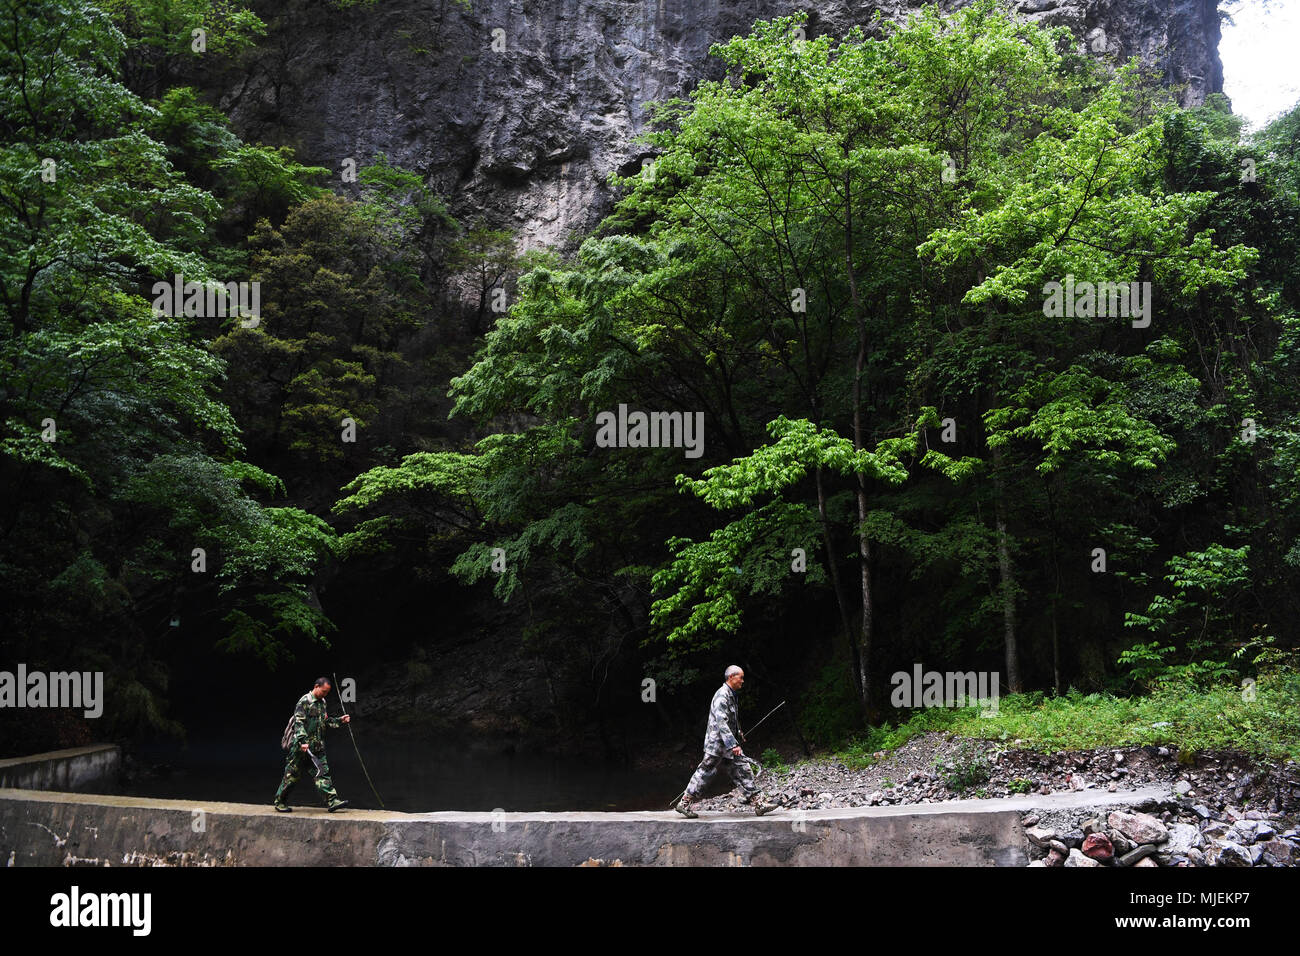 (180505) -- WUXI, May 5, 2018 (Xinhua) -- Bin Yuanpeng (R) together with his workmate patrols the Yintiaoling National Nature Reserve in Wuxi County of Chongqing Municipality, southwest China, May 4, 2018. Bin Yuanpeng, a 59-year-old male ranger, has worked at the Baiguo forest farm of the Yintiaoling National Nature Reserve for 26 years. Bin's main work is patrolling and promoting protection knowlege on the forest to prevent it from some unlawful activities and natural disasters. Together with his workmates, Bin always patrols the forest from early morning to evening. Due to their constant ef Stock Photo